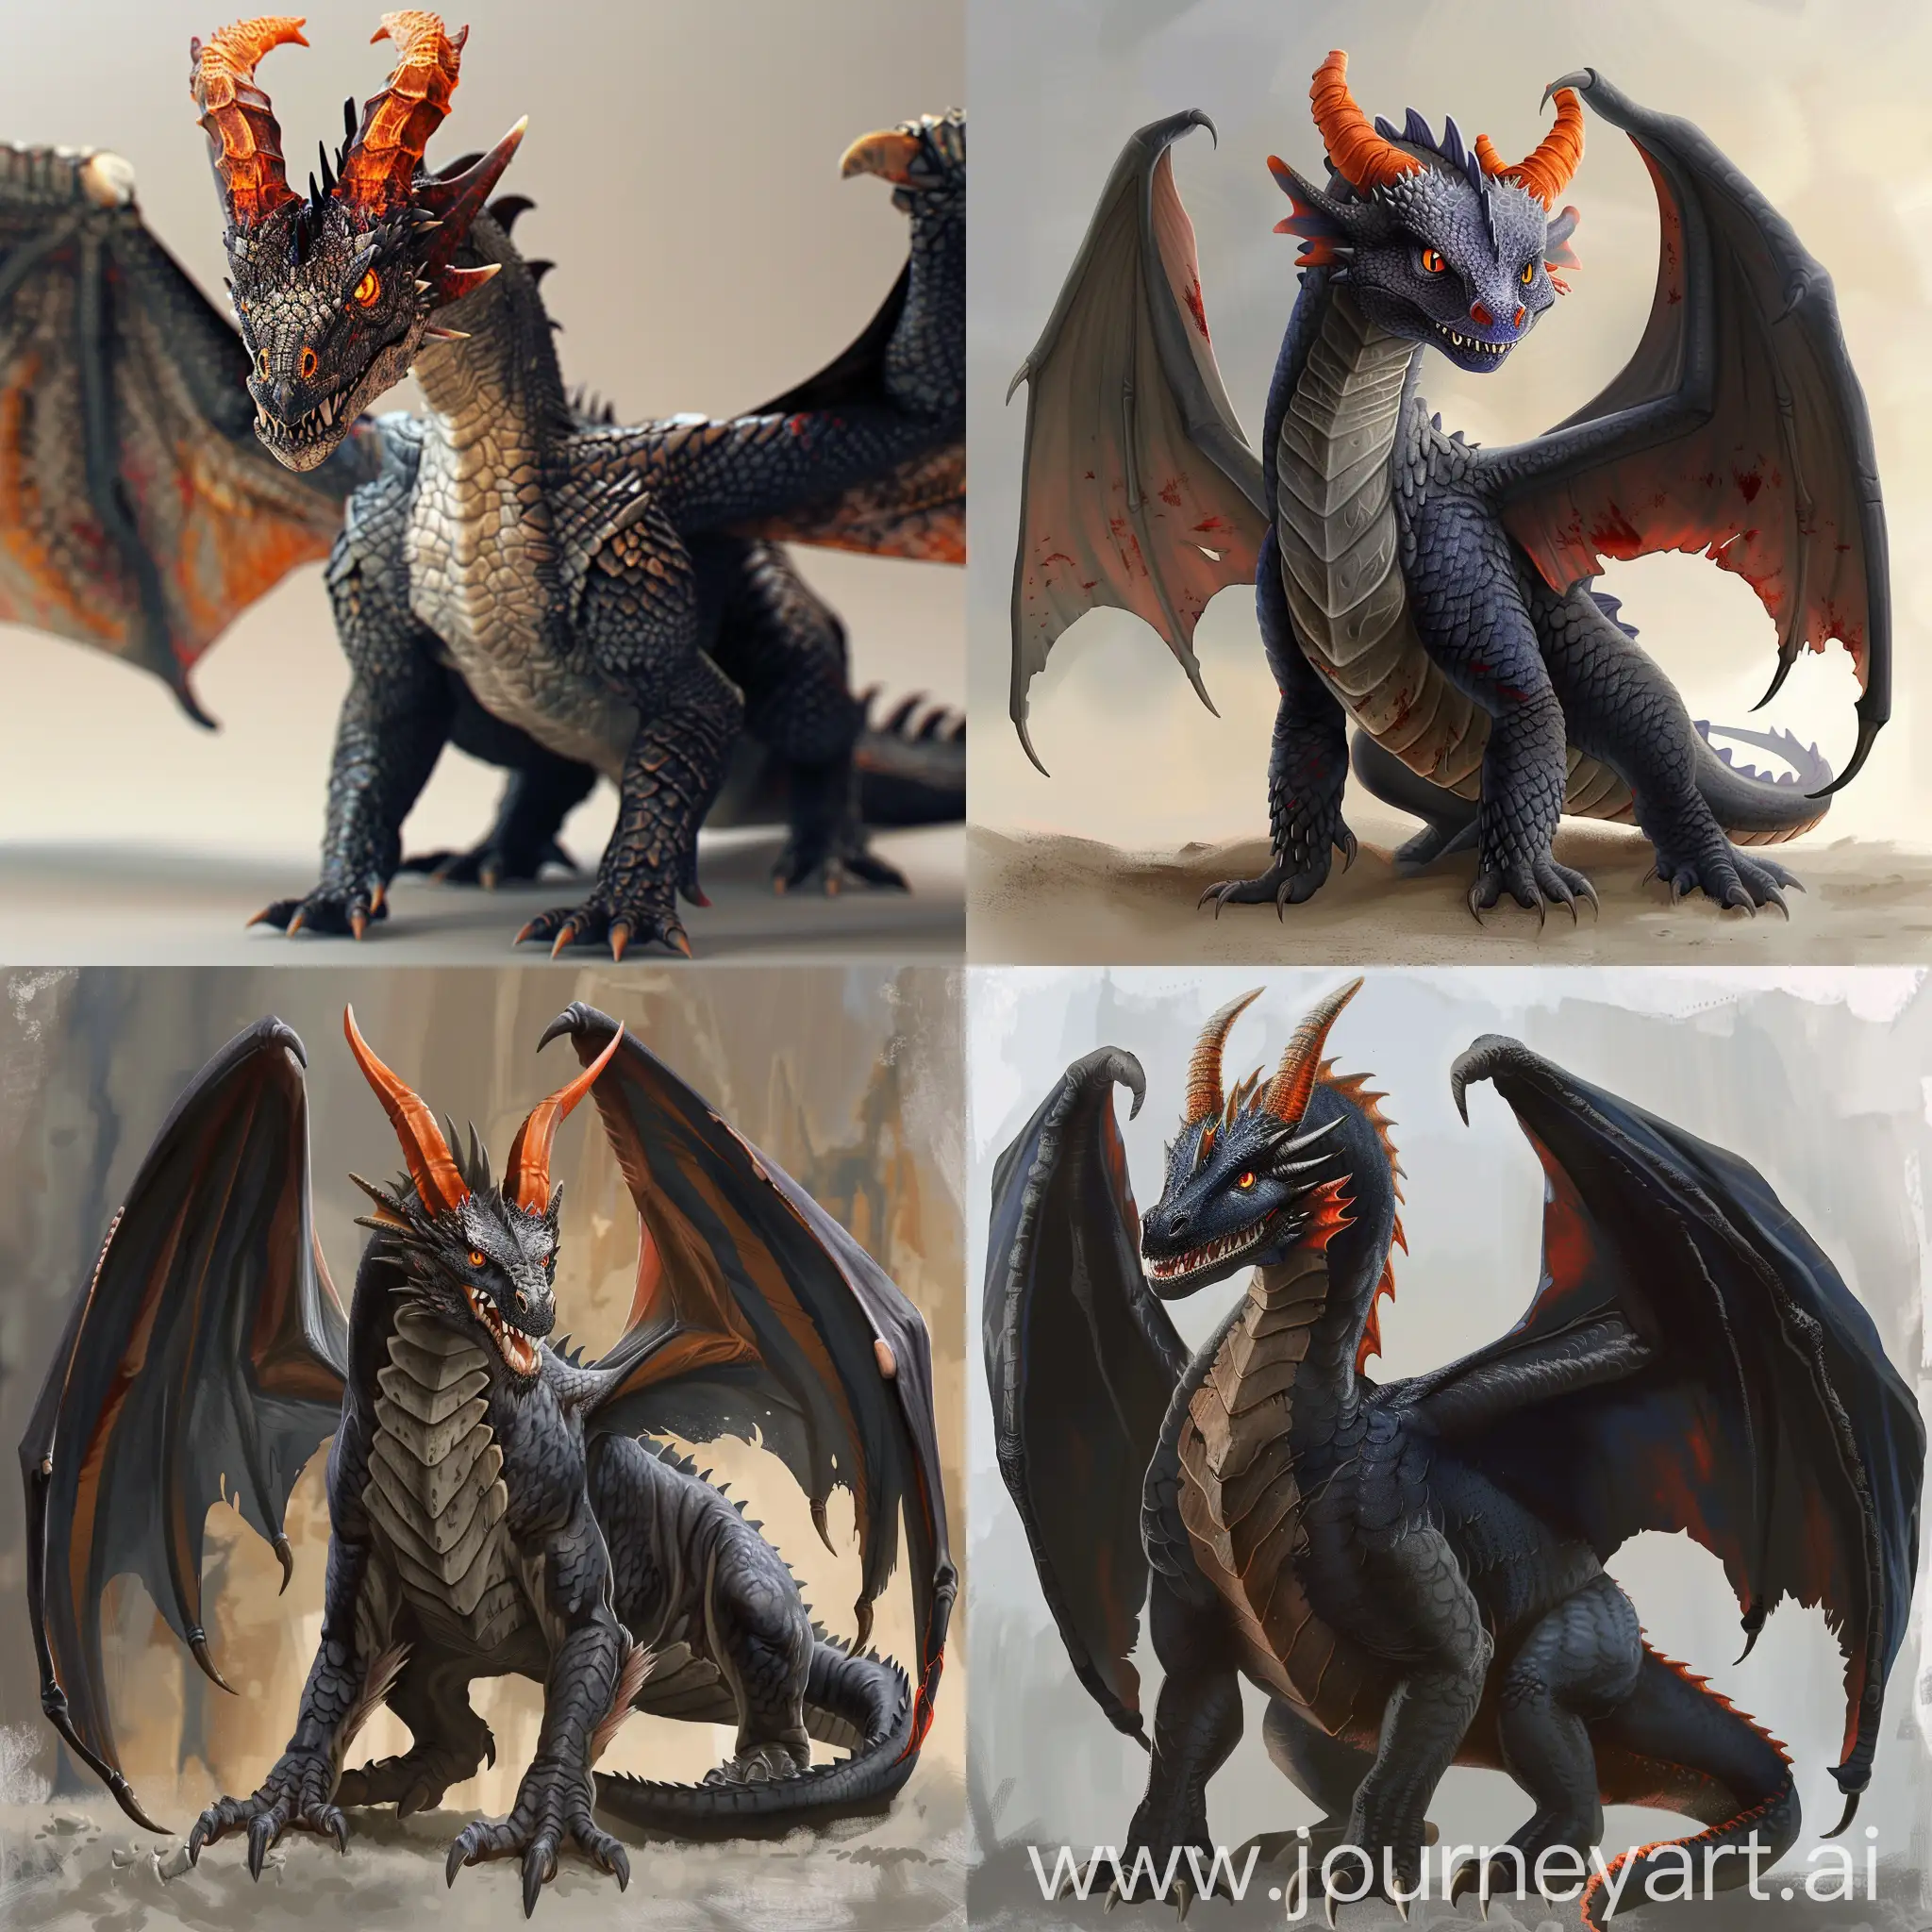 Majestic-Dragon-with-Black-and-Red-Scales-Copper-Horns-and-Fiery-Eyes